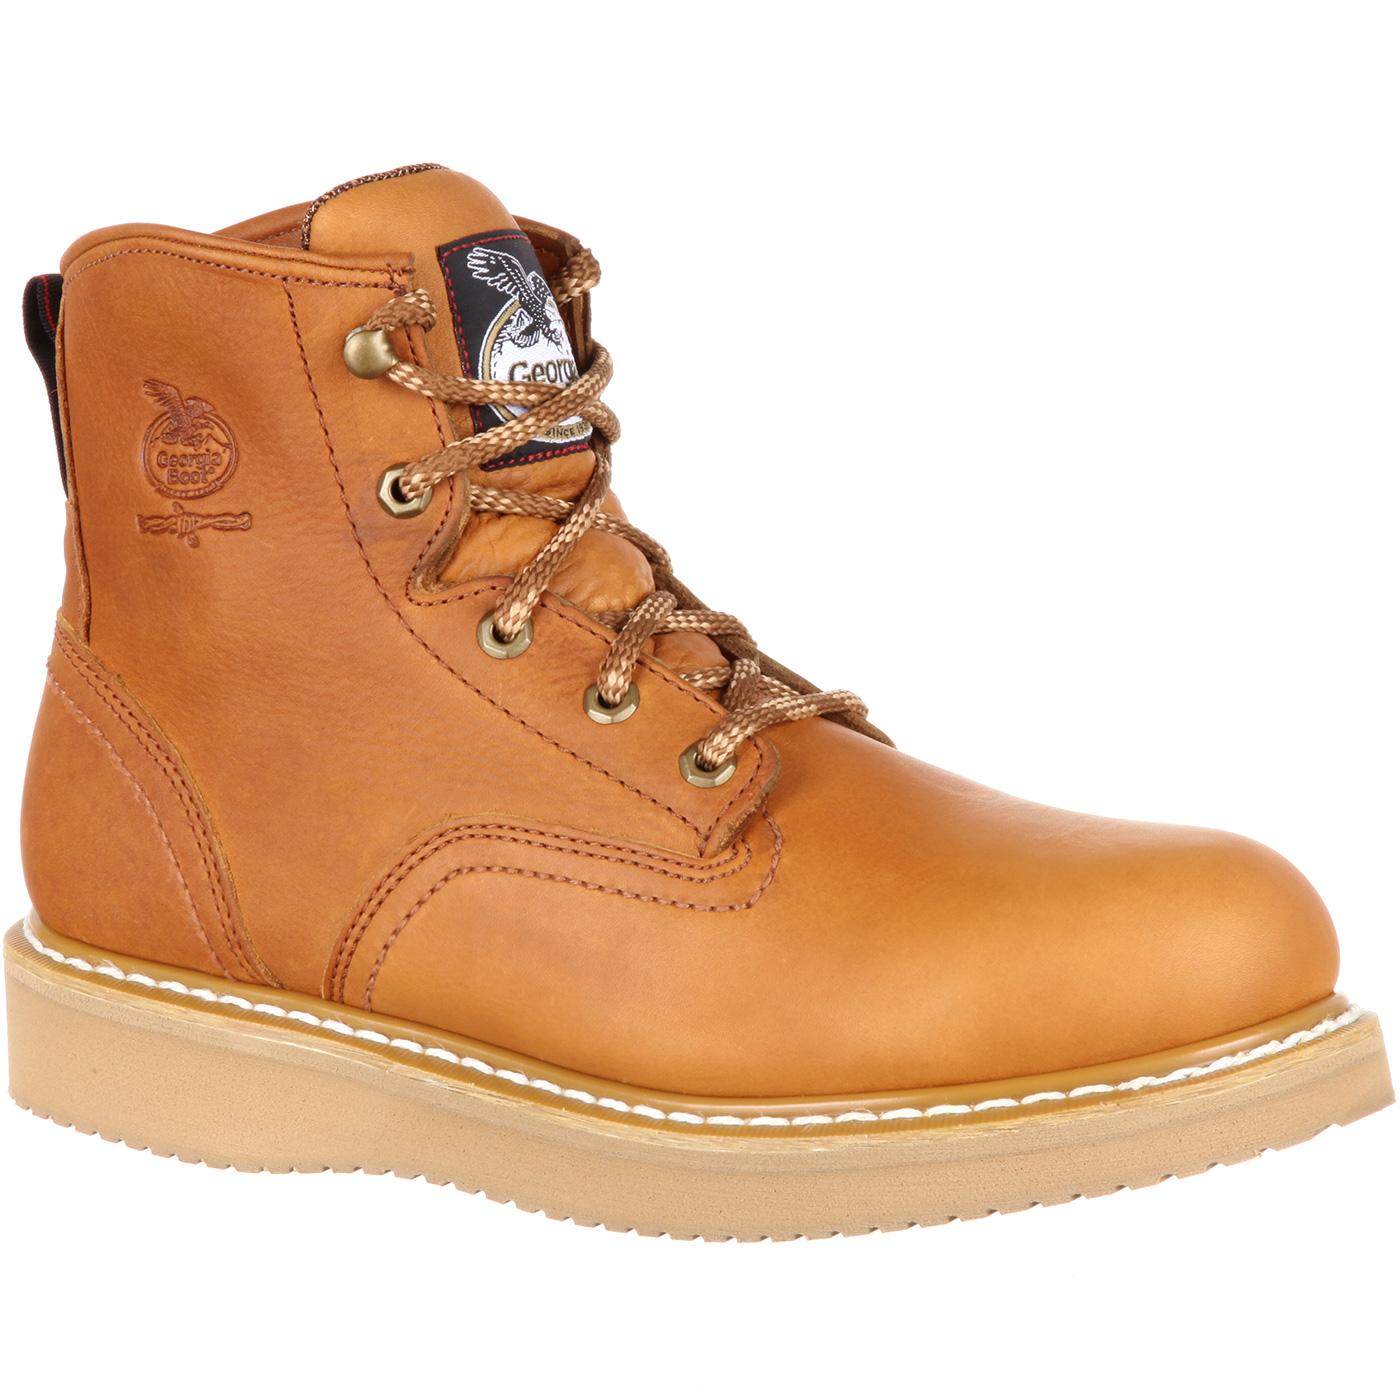 Georgia Boot - Men's Leather Work Boots with Wedge Sole - Style #G6152